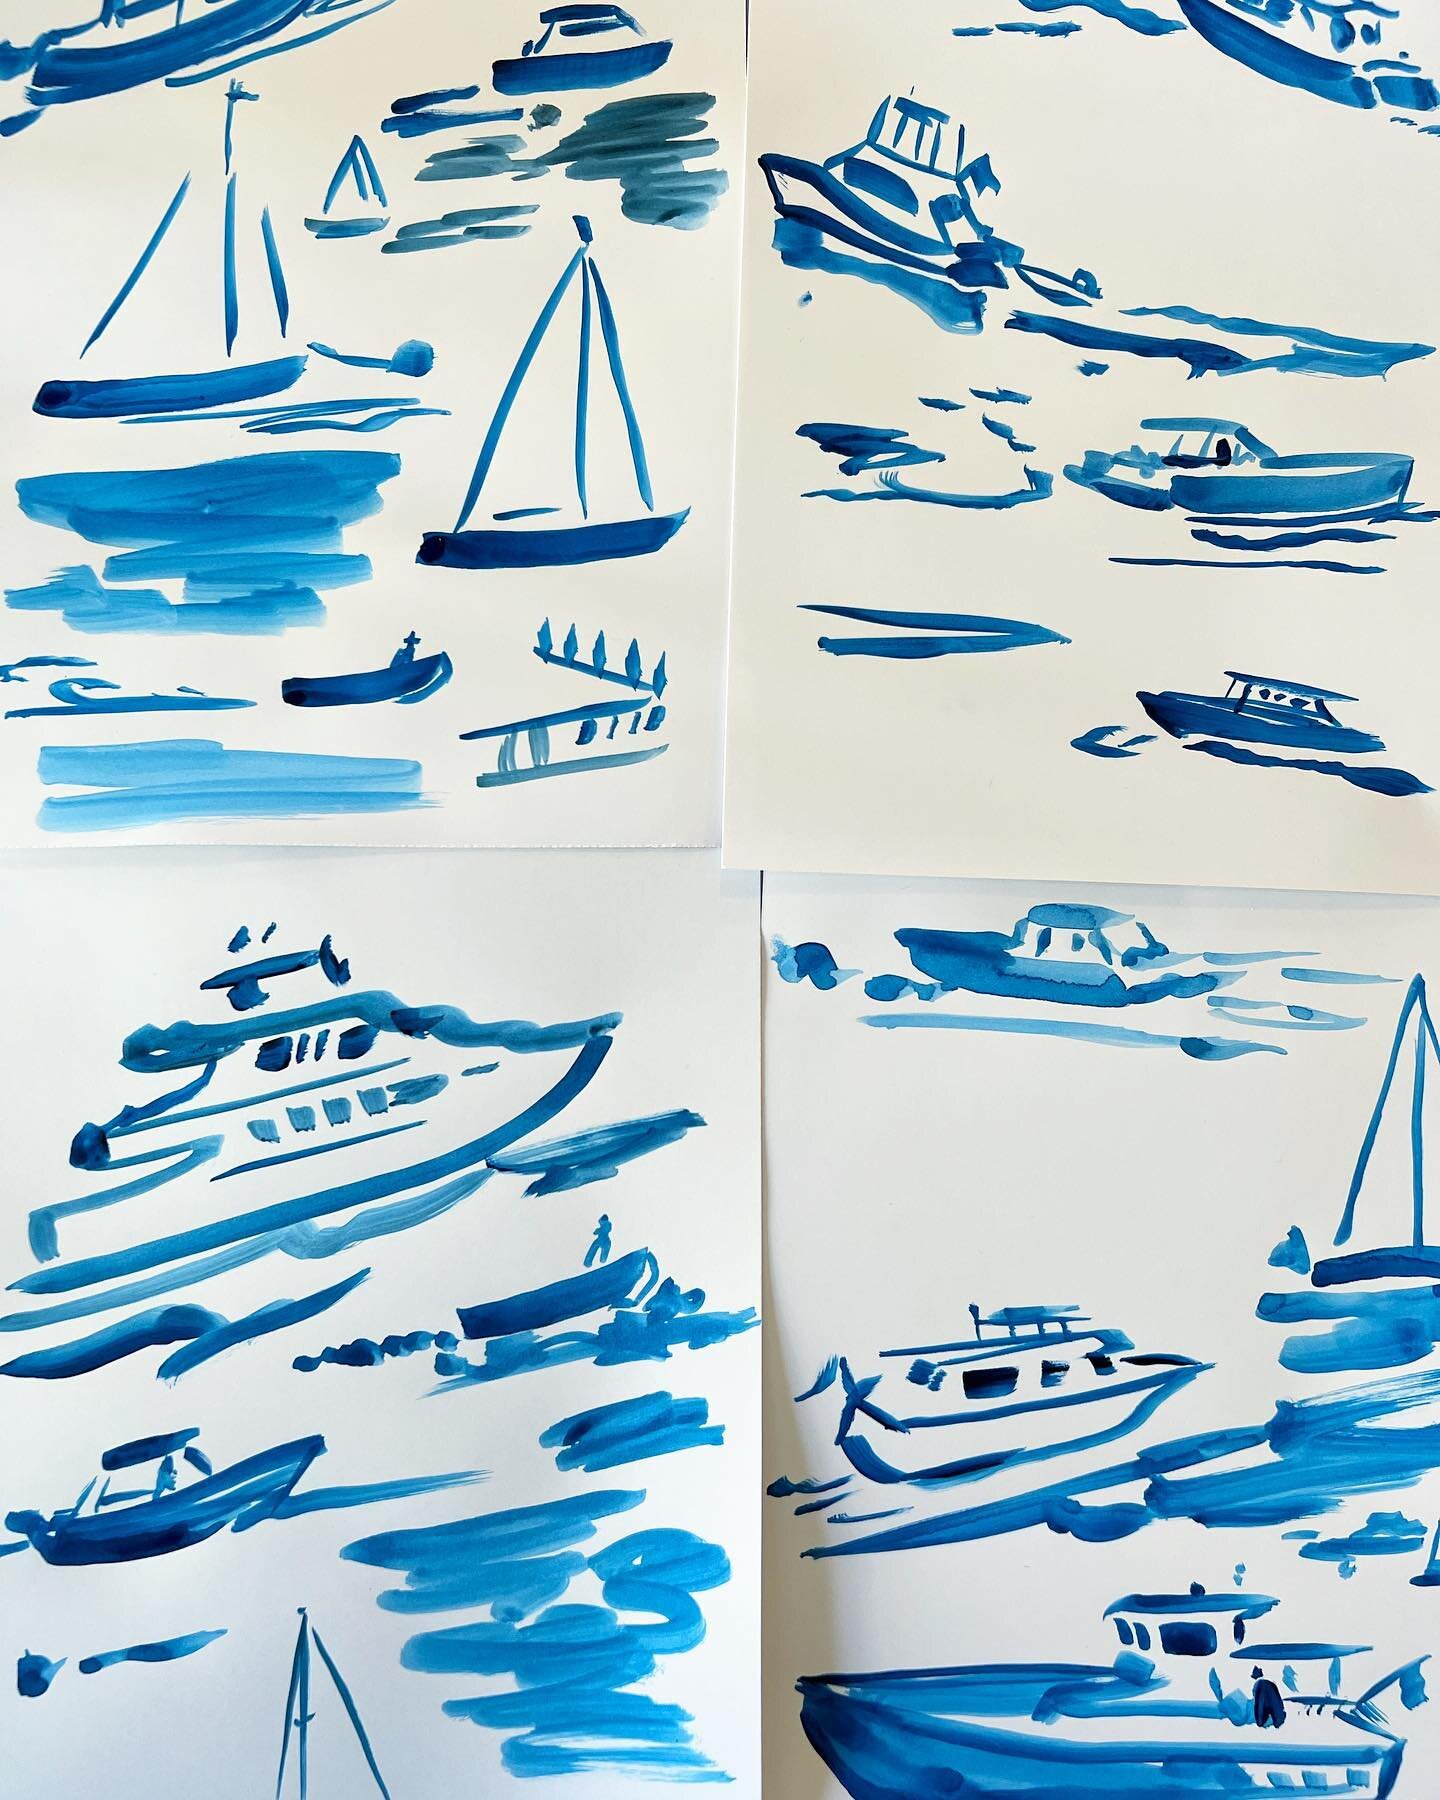 Painting the boats from Sag Harbor 🛳 #paintingfromlife